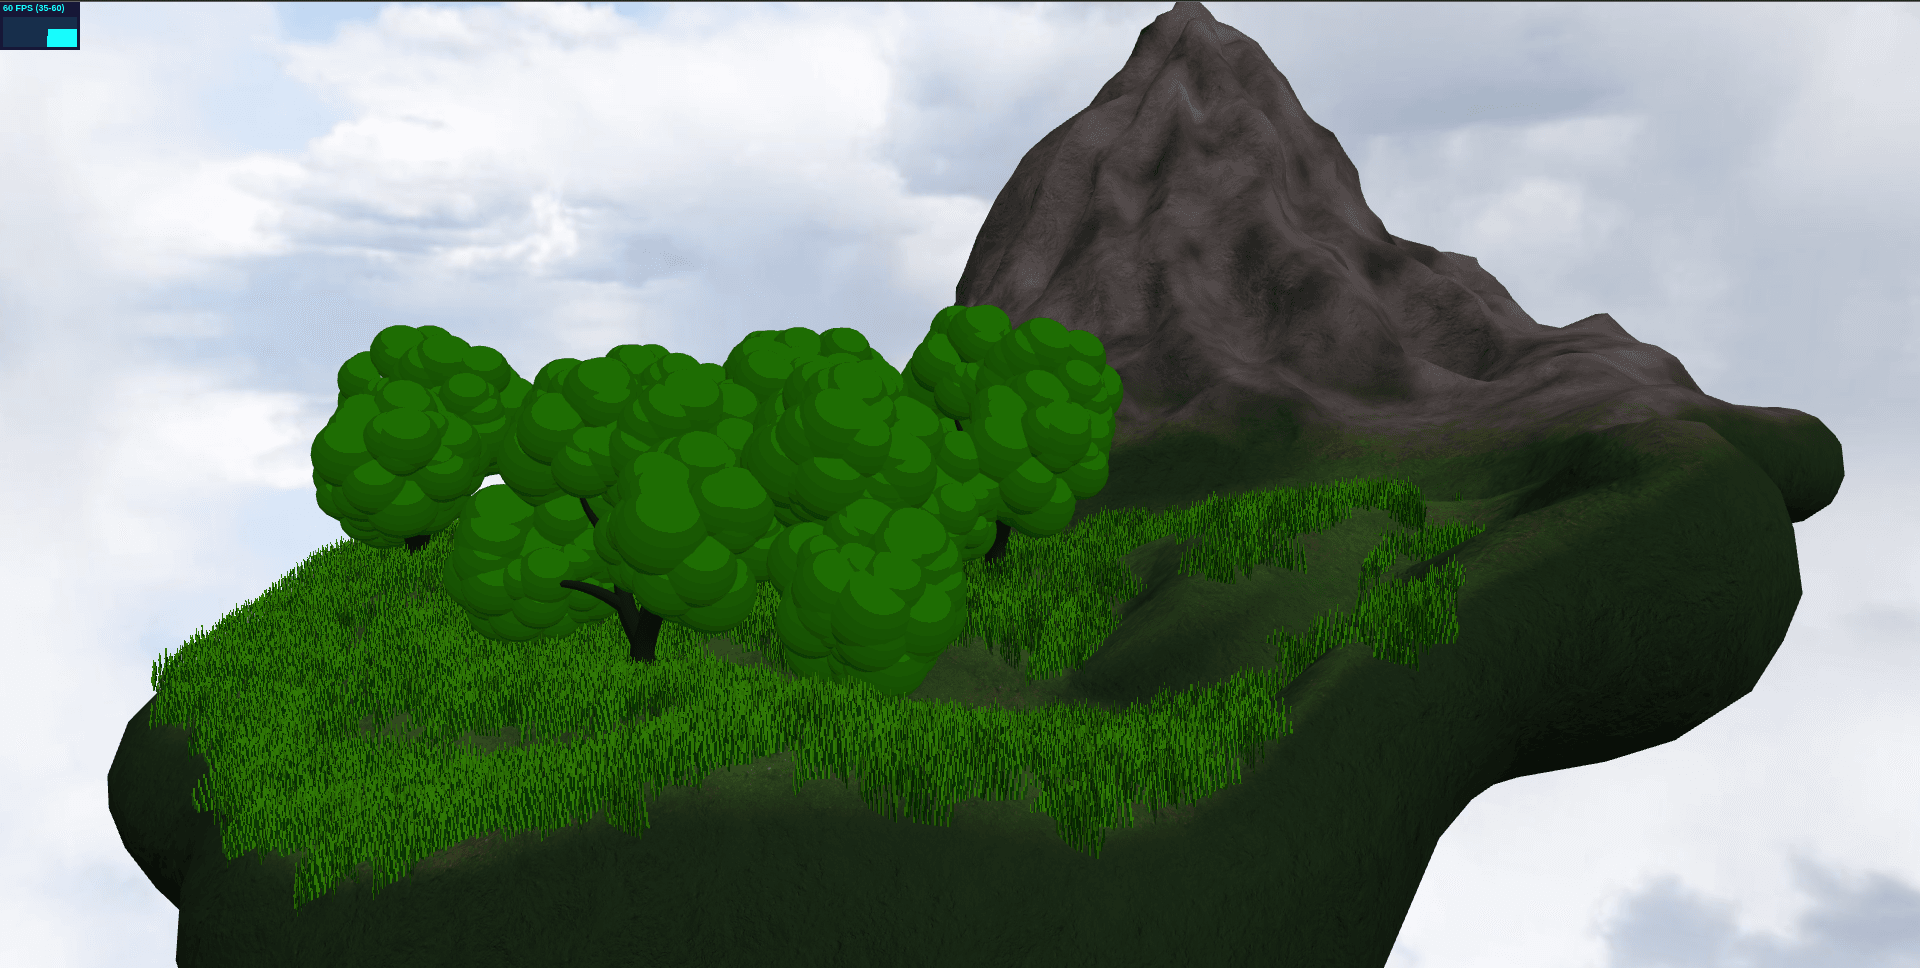 A screenshot of the 3D world in the browser showing a floating island with clouds in the background, grass, low-poly trees, a mountain, texturing, and a FPS counter